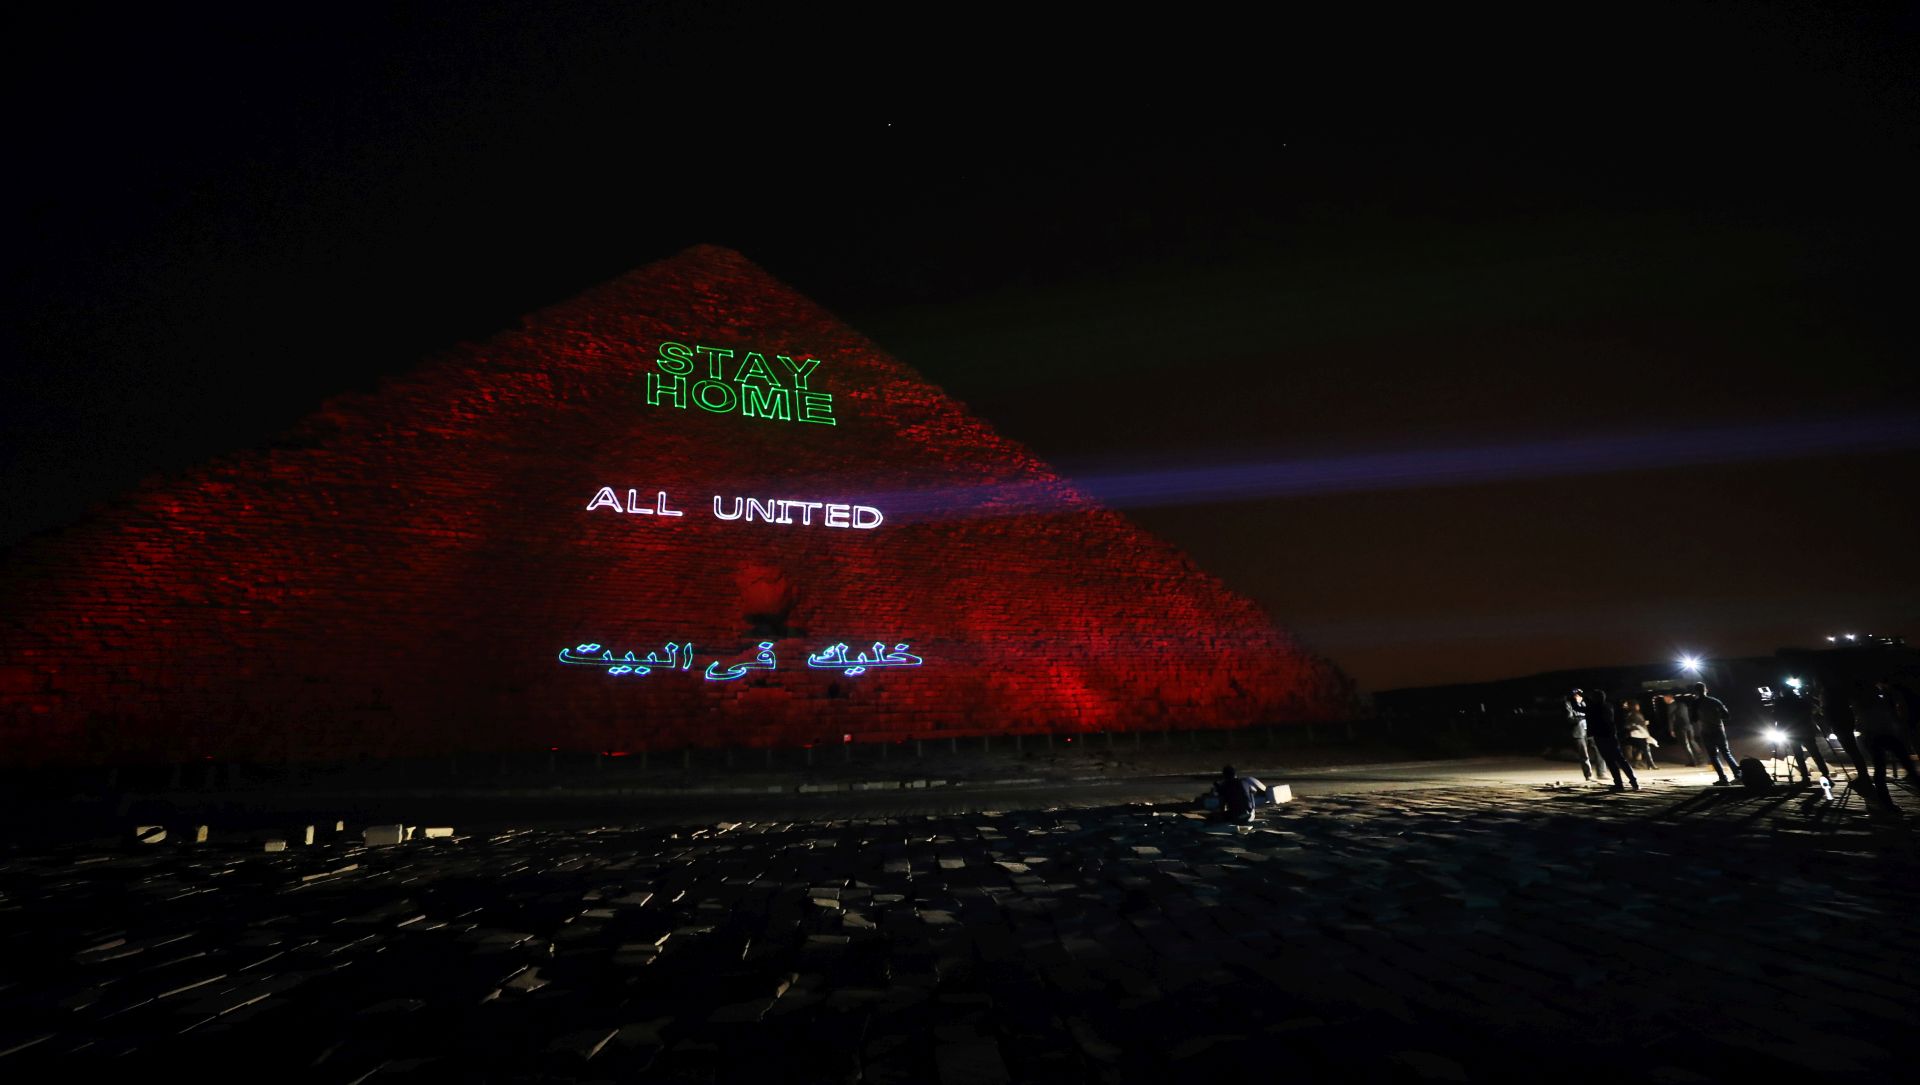 epa08332950 General view of the pyramids lit up with text encouraging Egyptians to stay home and safe because of COVID-19 and sending a thank you massage to those keeping poeple safe in Giza, Egypt, 30 March 2020. Egyptian authorities had announce a two-week curfew, which started on 25 March, during which public transportation will be suspended to avoid the spread of the SARS-CoV-2 coronavirus which causes the COVID-19 disease  EPA/KHALED ELFIQI